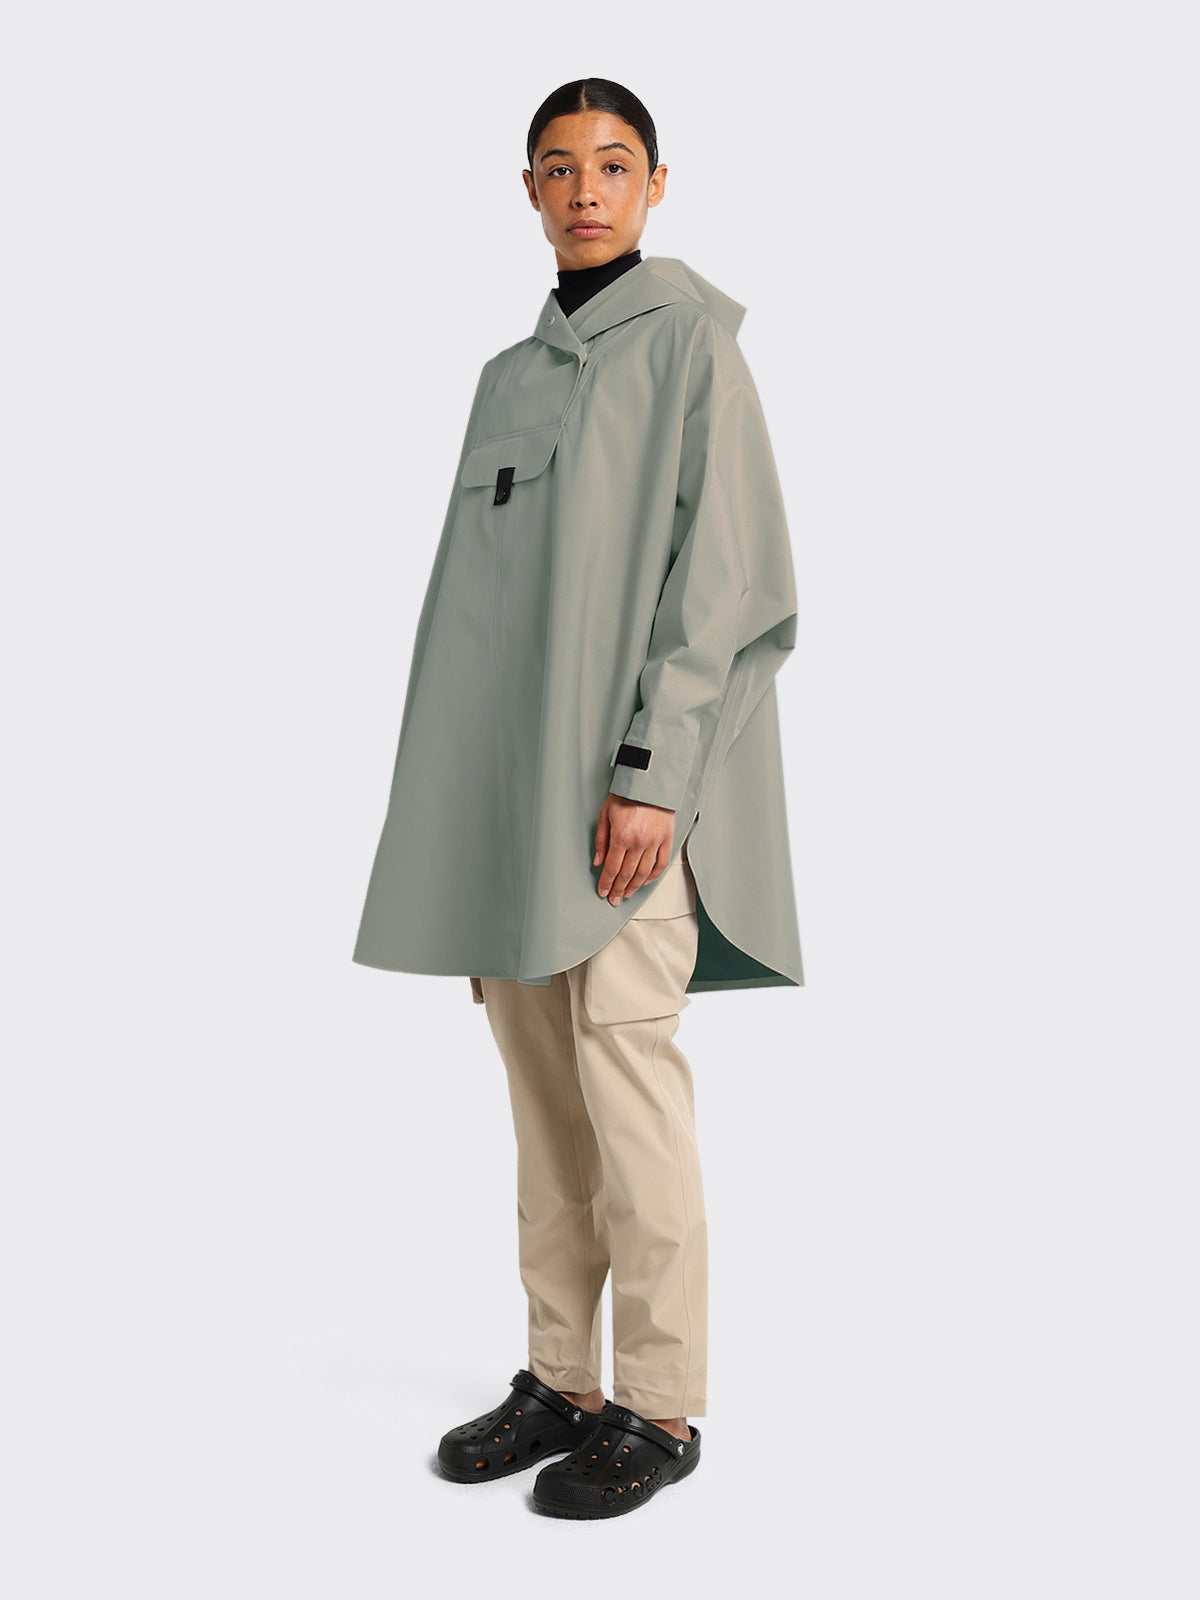 Woman in Bergen poncho from Blæst in the color Vetiver